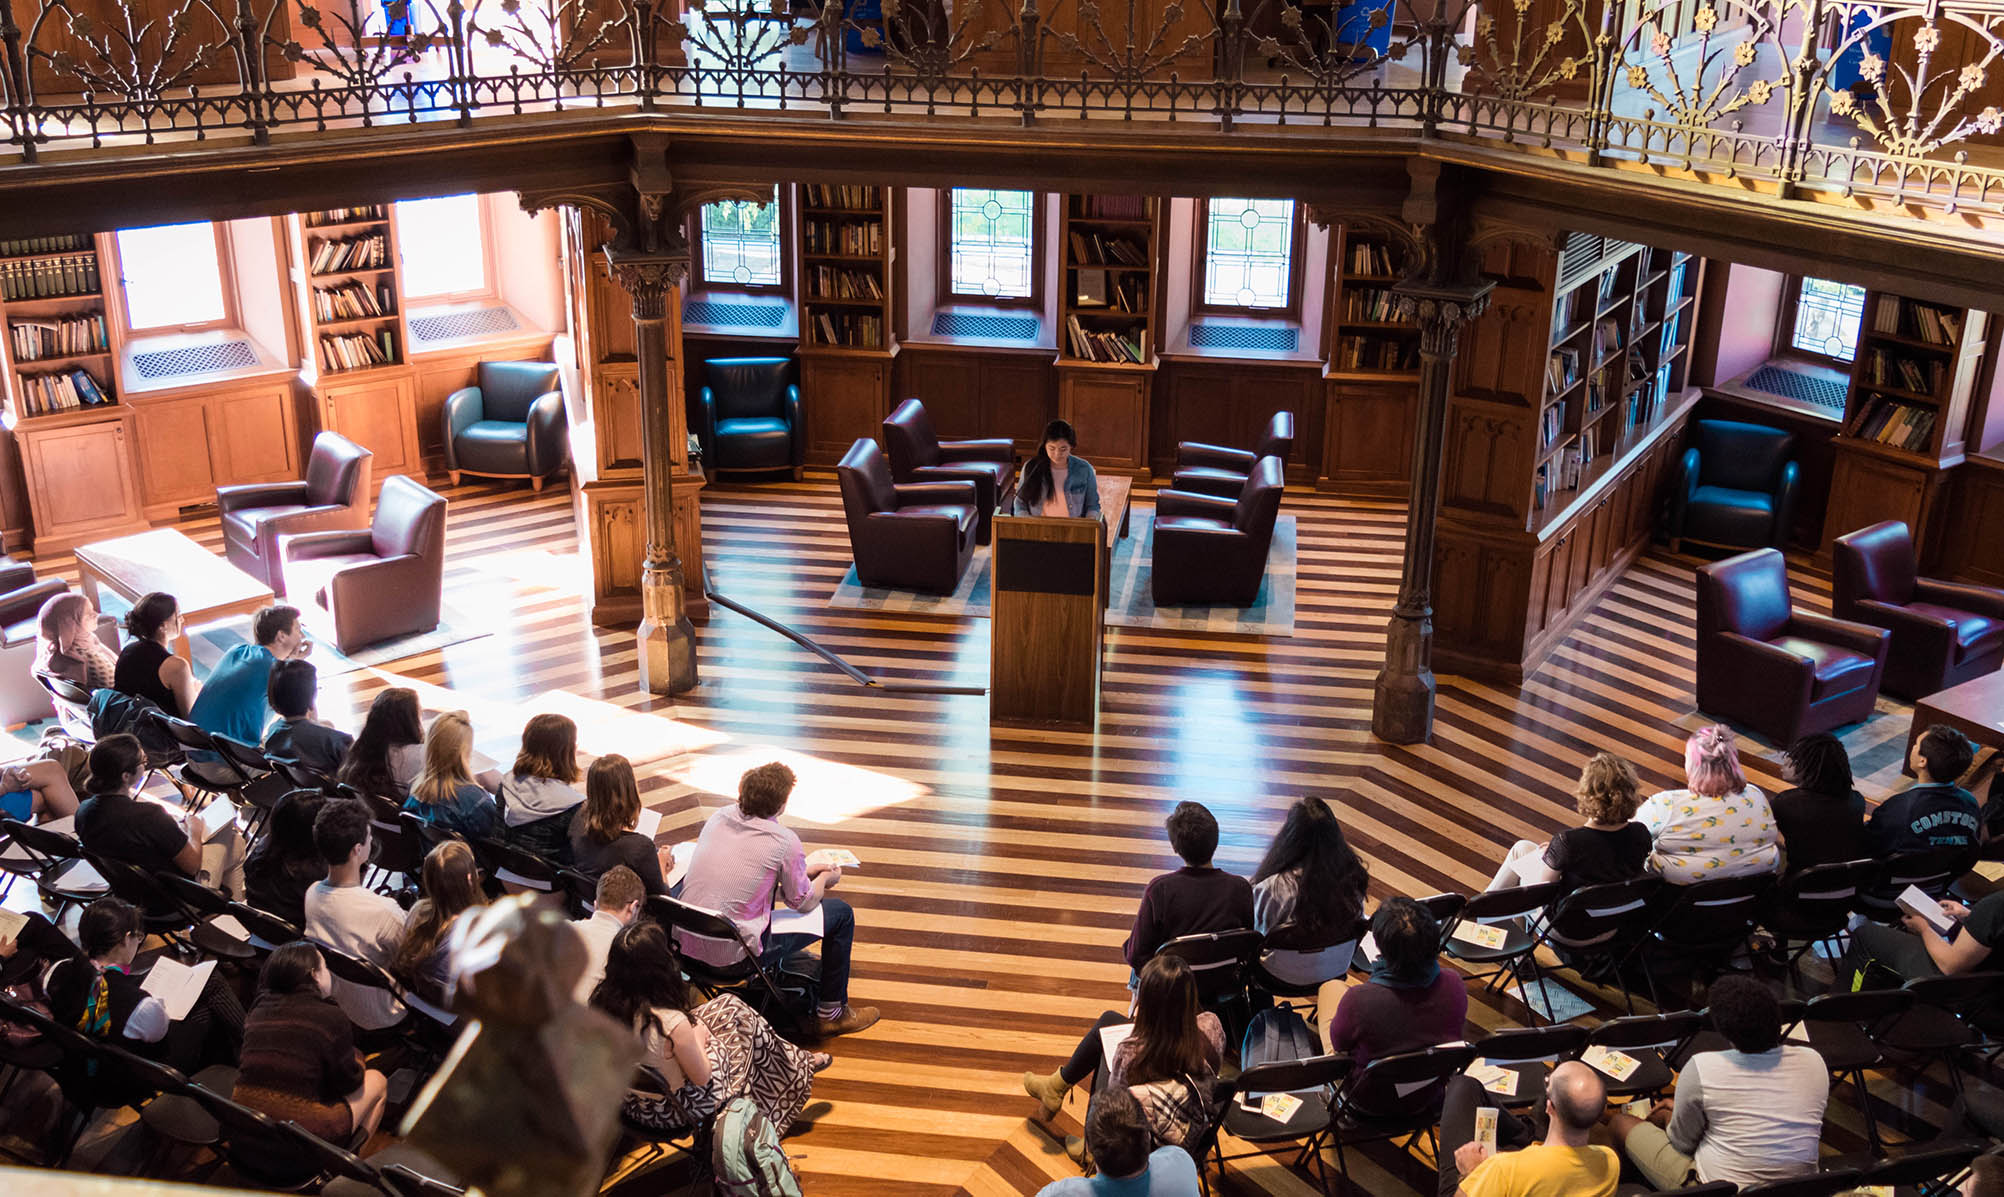 one student reads at a podium in front of a seated crowd in a grand library with striped wooden floors and ornate trim work